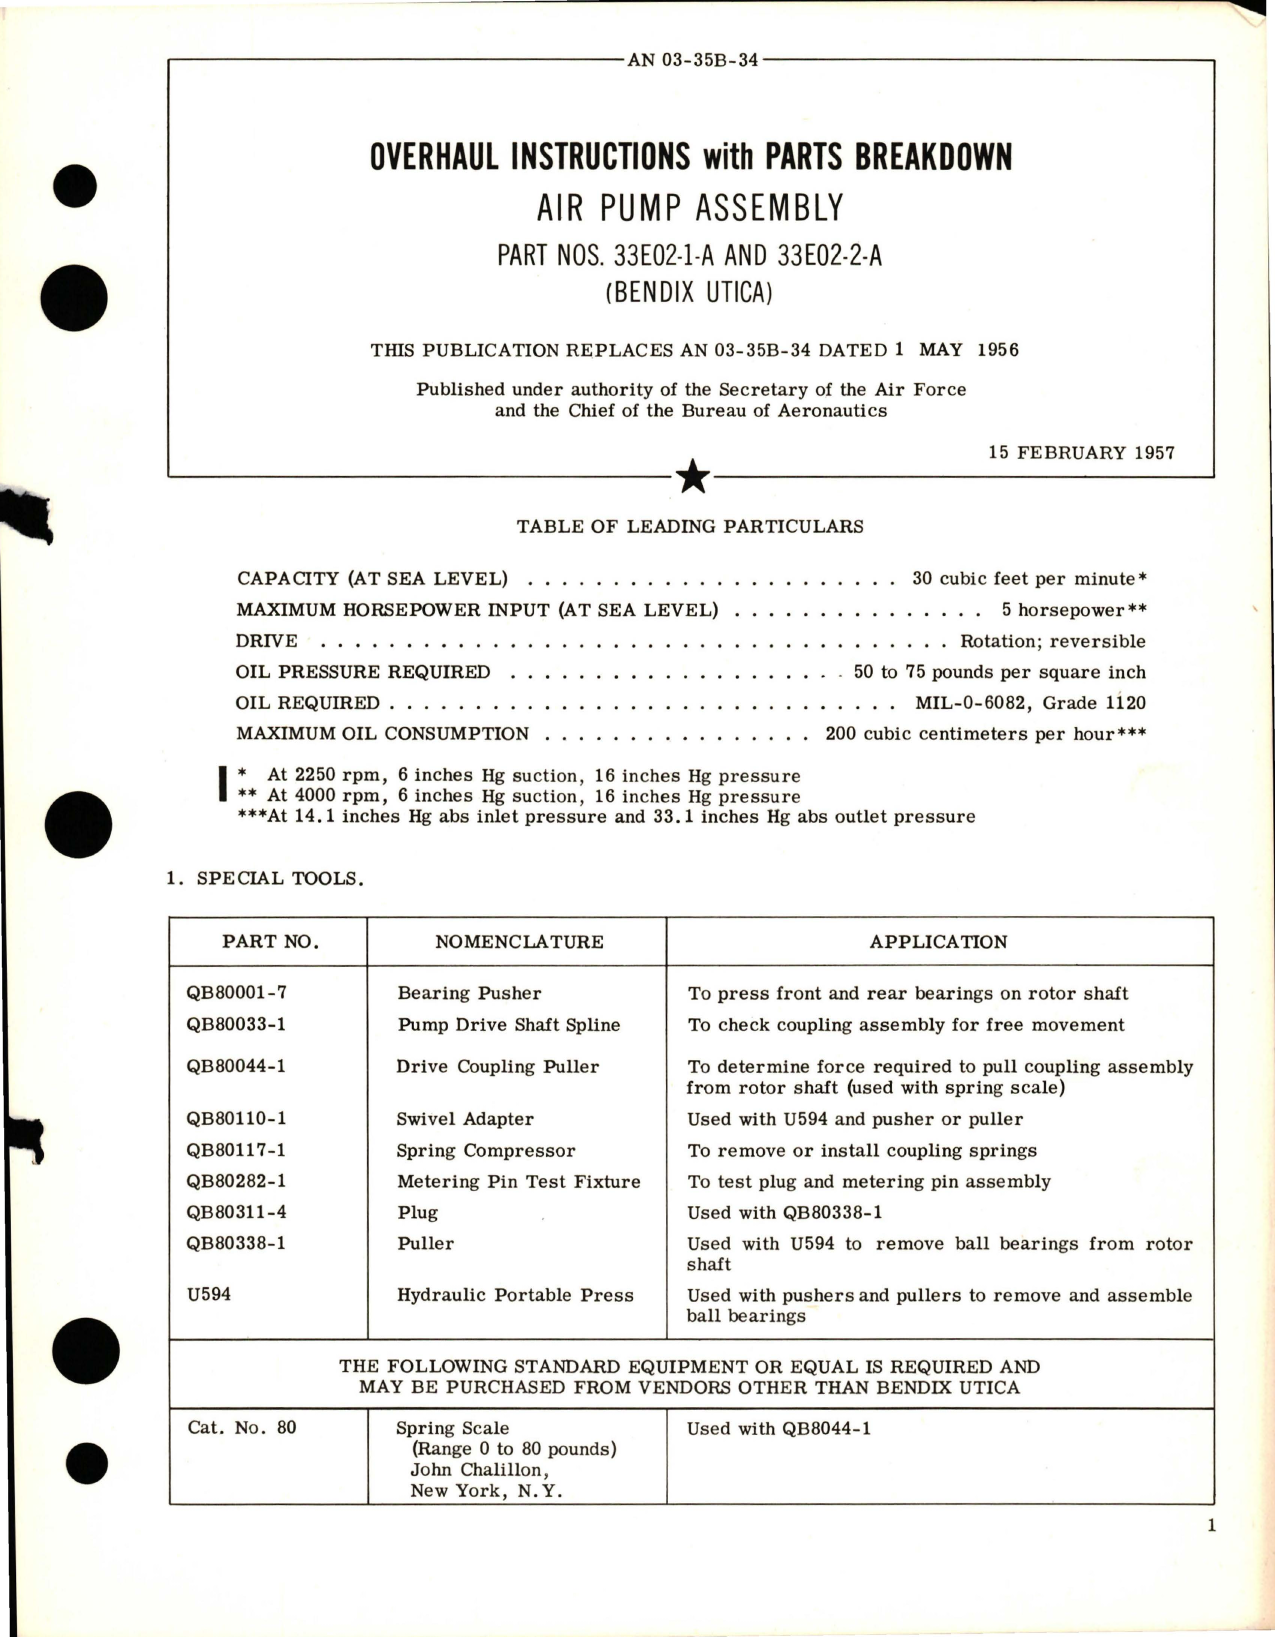 Sample page 1 from AirCorps Library document: Overhaul Instructions with Parts Breakdown for Air Pump Assembly - Parts 33E02-1-A and 33E02-2-A 